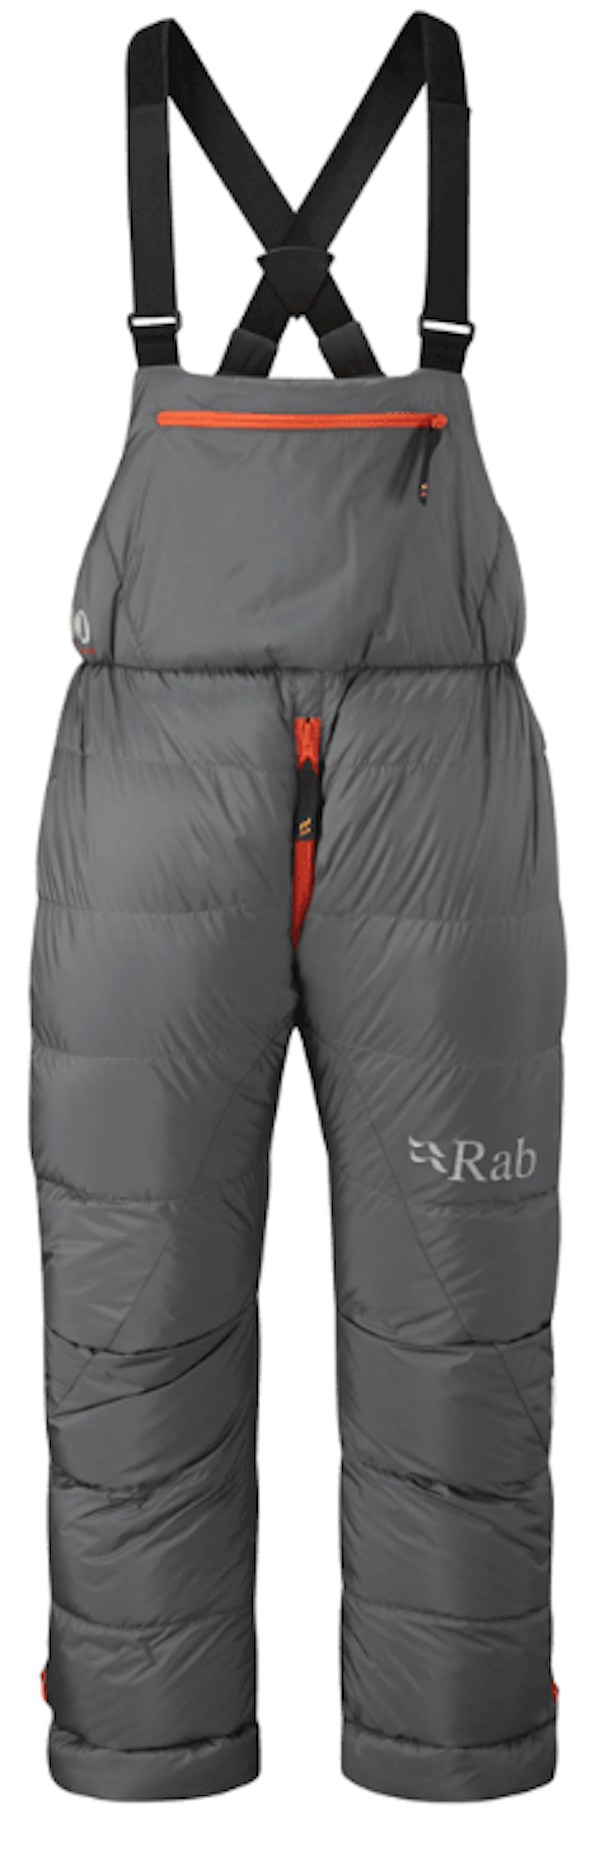 Rab Expedition 8000 - Mountaineering trousers